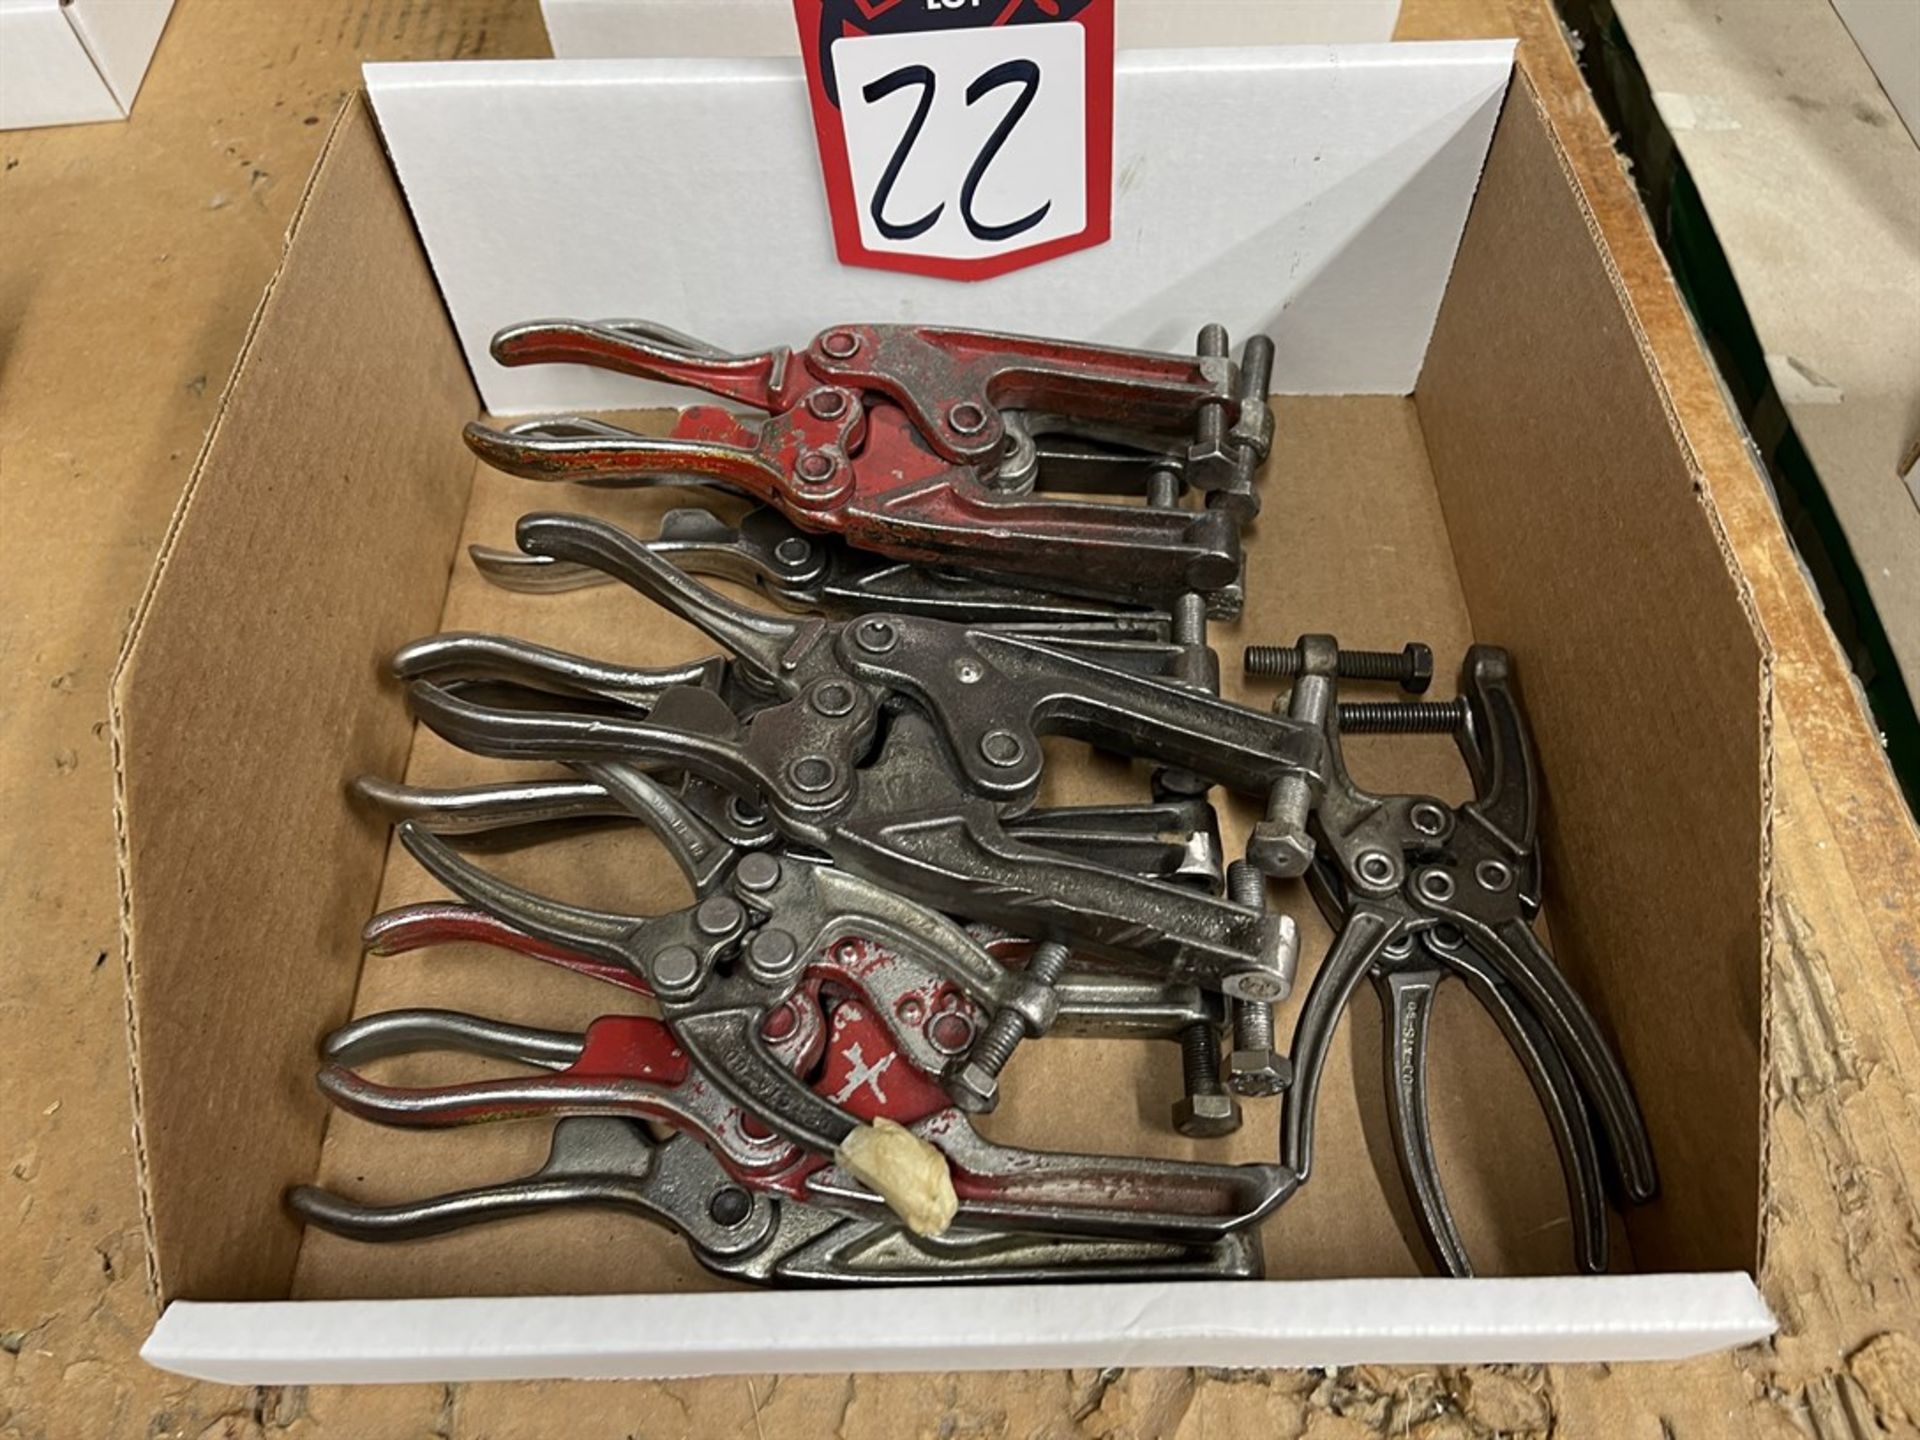 Lot of Knu-Vice Clamps